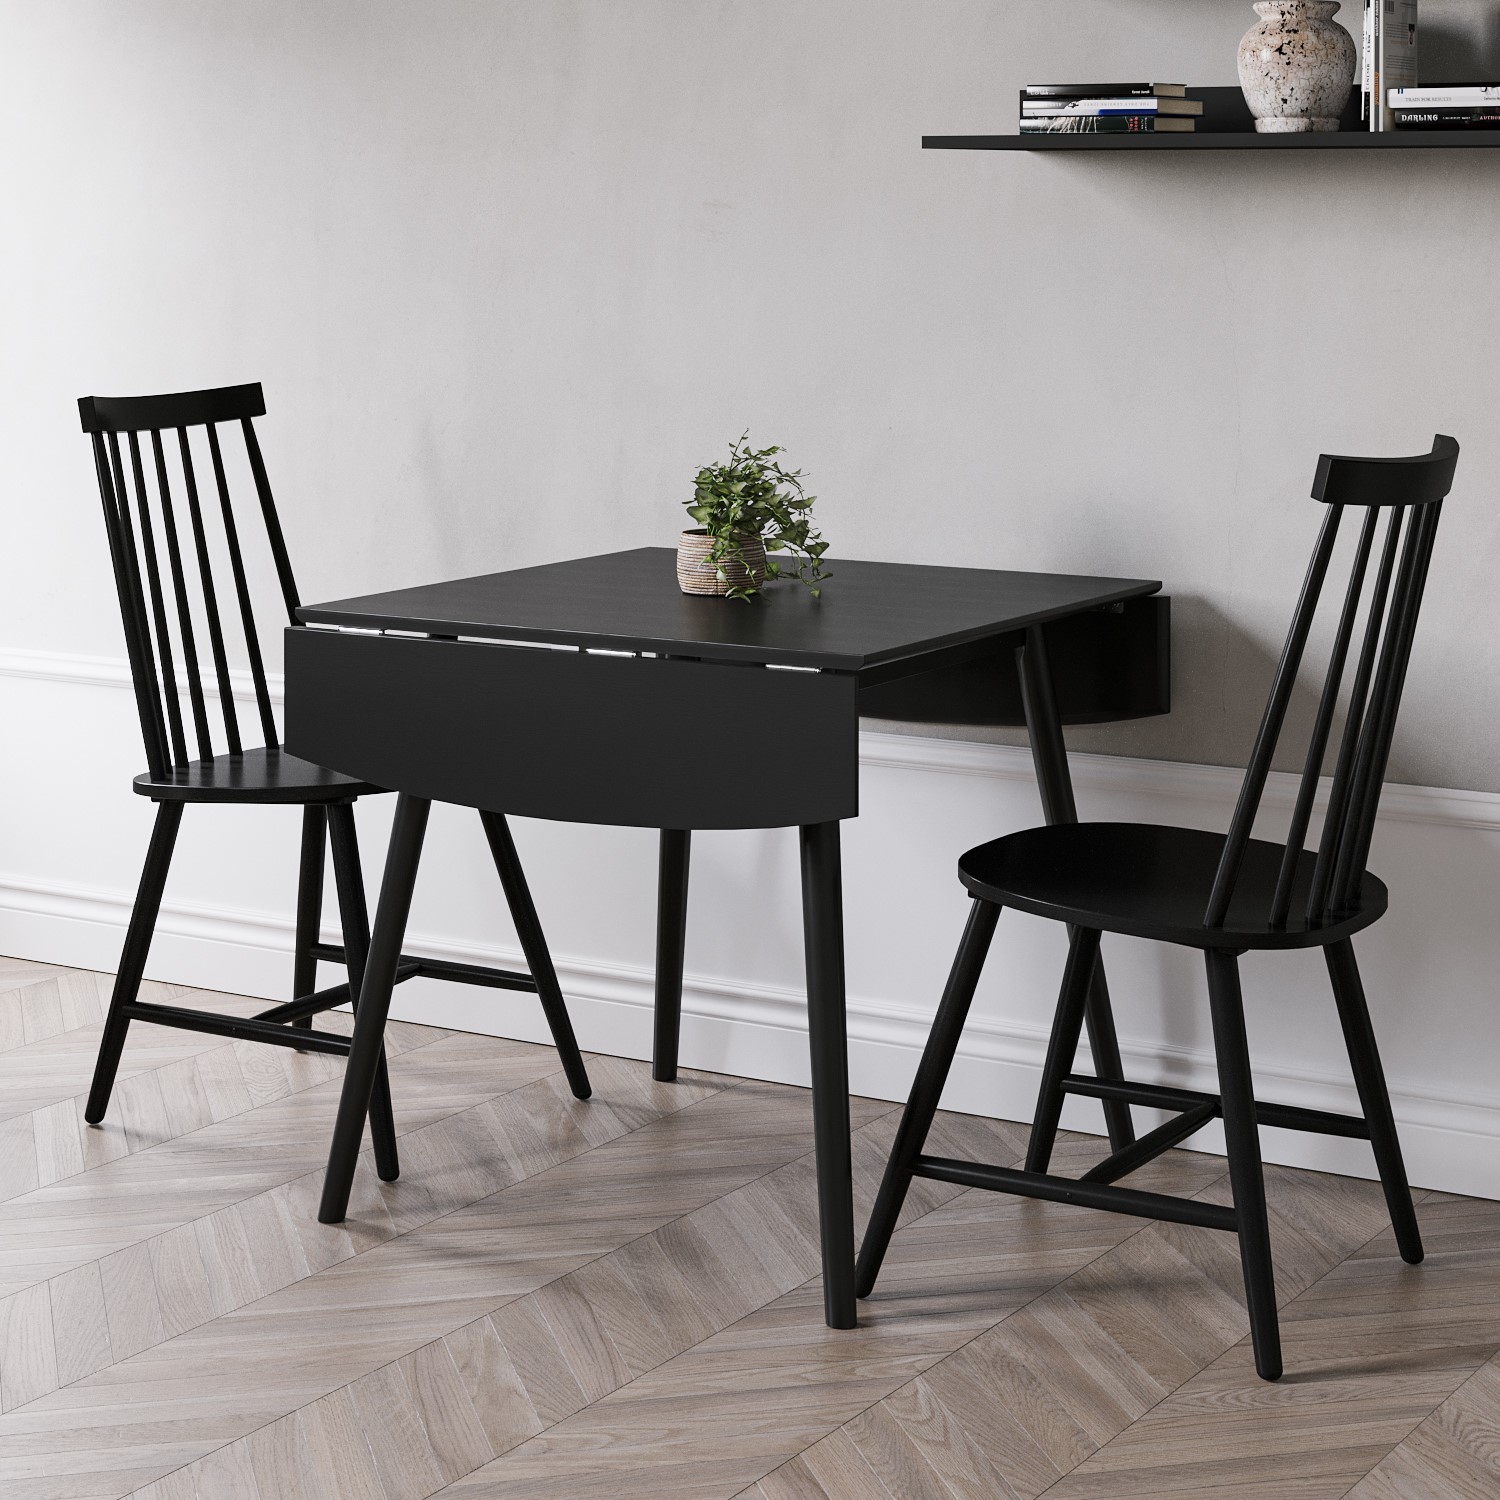 Photo of Black drop leaf dining table with 2 black spindle dining chairs- olsen